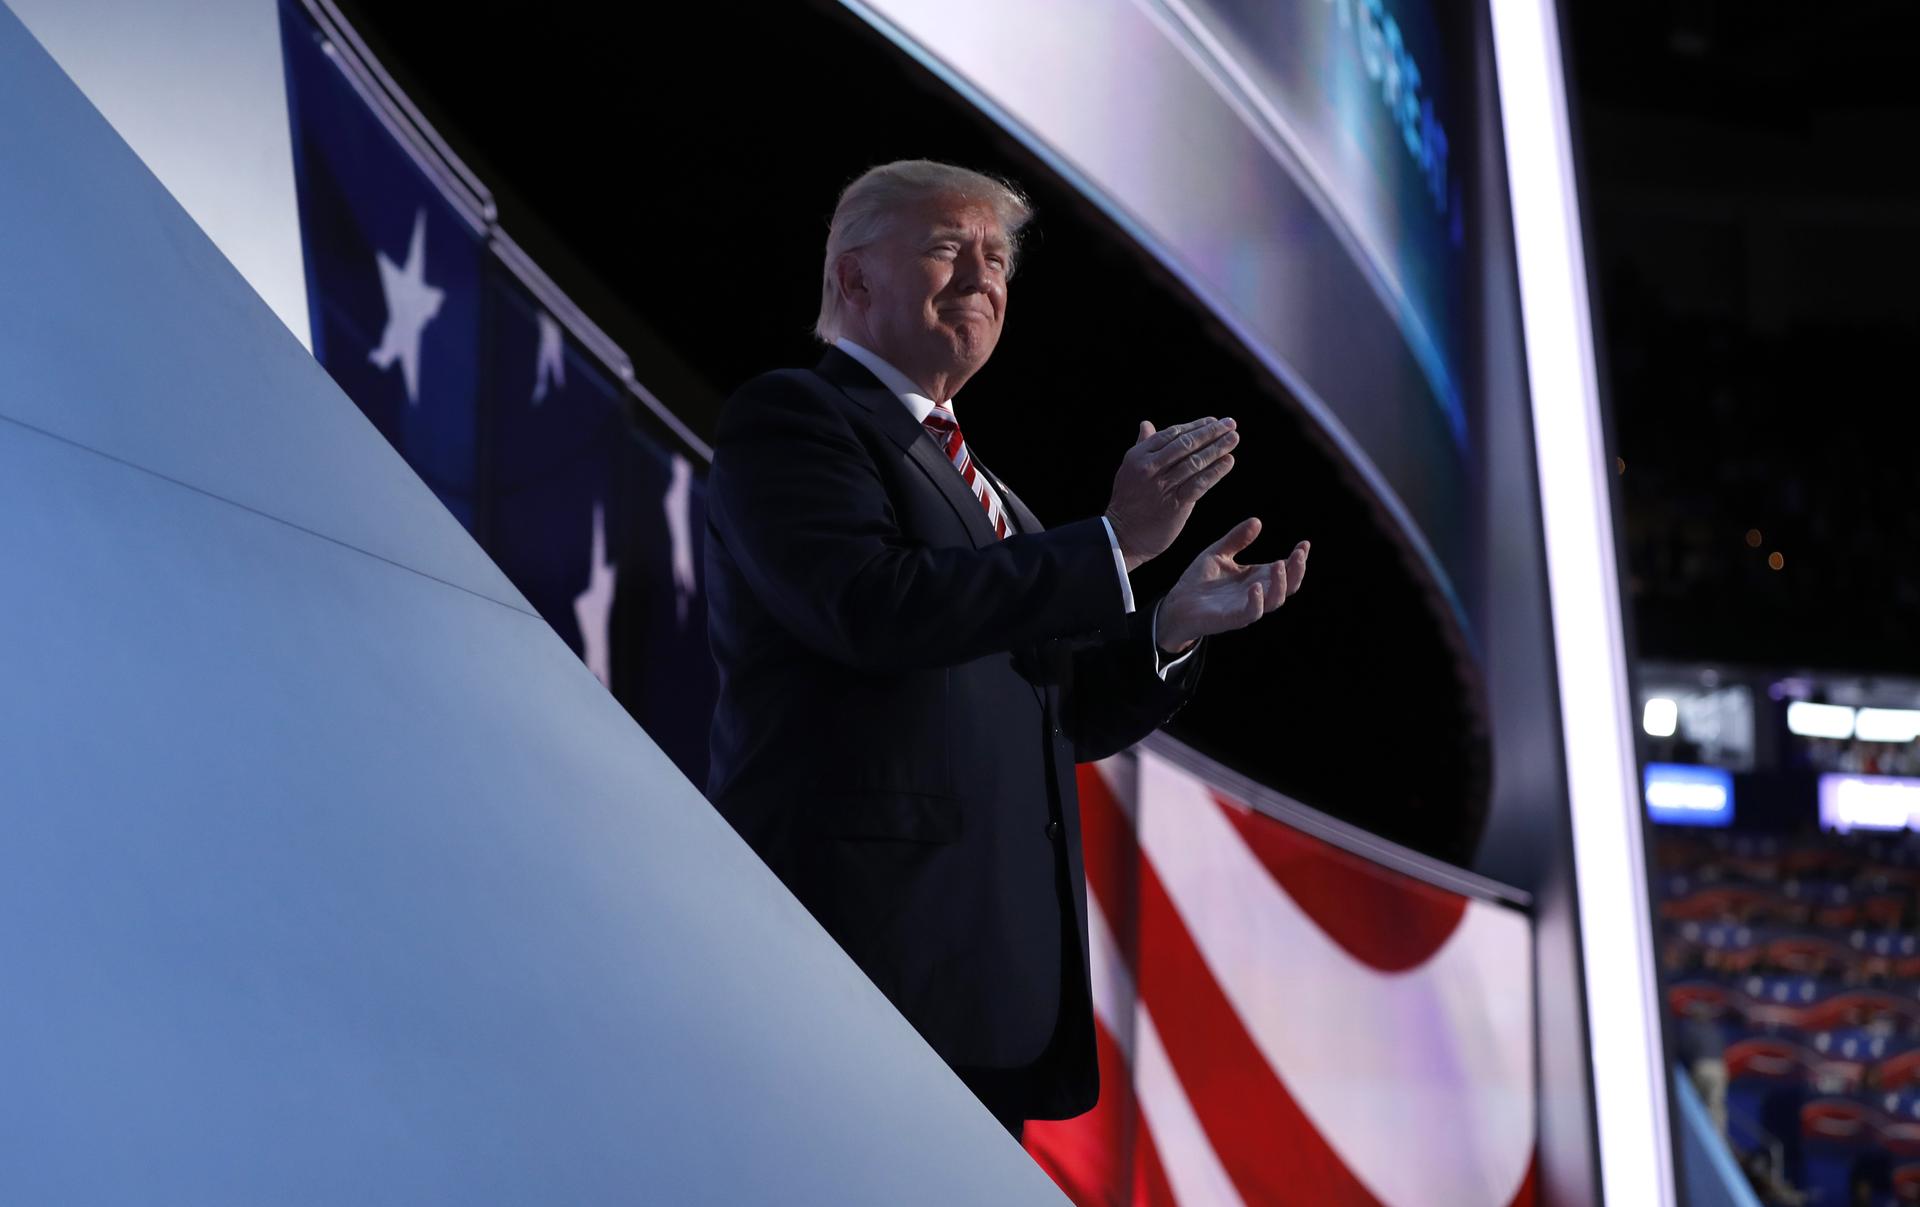 Republican U.S. presidential nominee Donald Trump applauds onstage as his running-mate Indiana Governor Mike Pence concludes his speech during the third night of the Republican National Convention in Cleveland, Ohio, U.S. July 20, 2016.